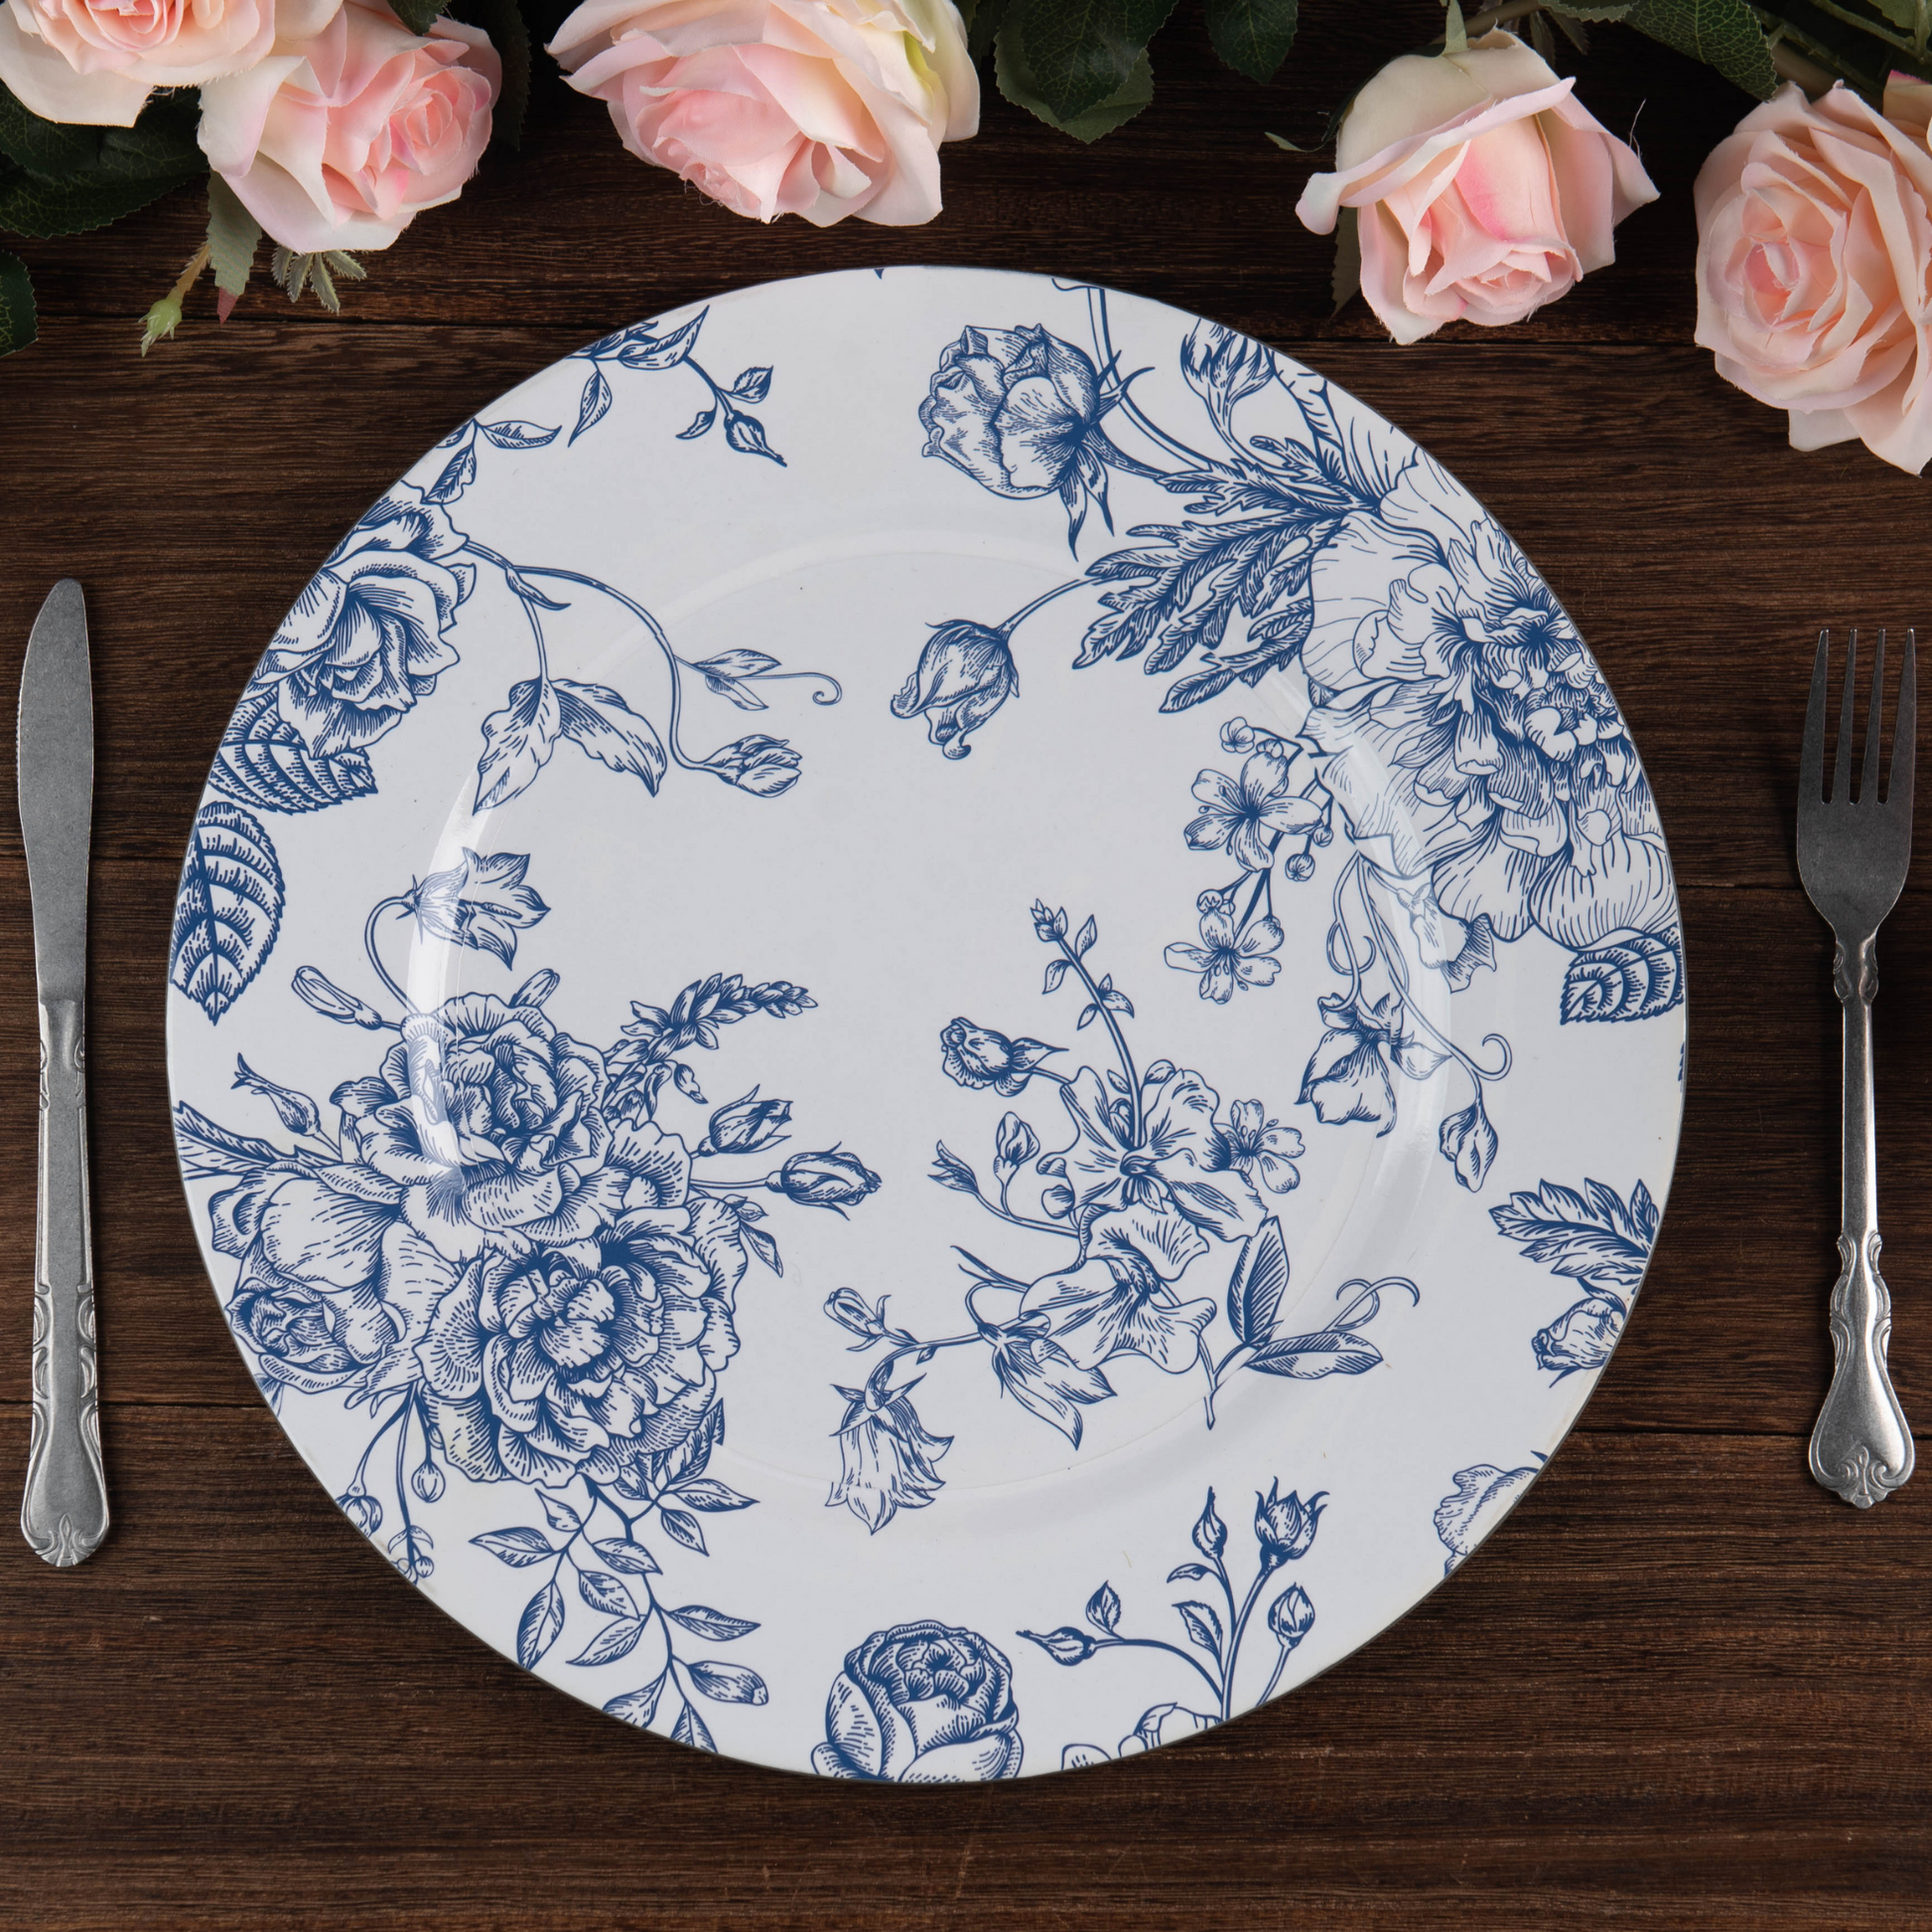 French Toile Acrylic Charger Plate - Blue